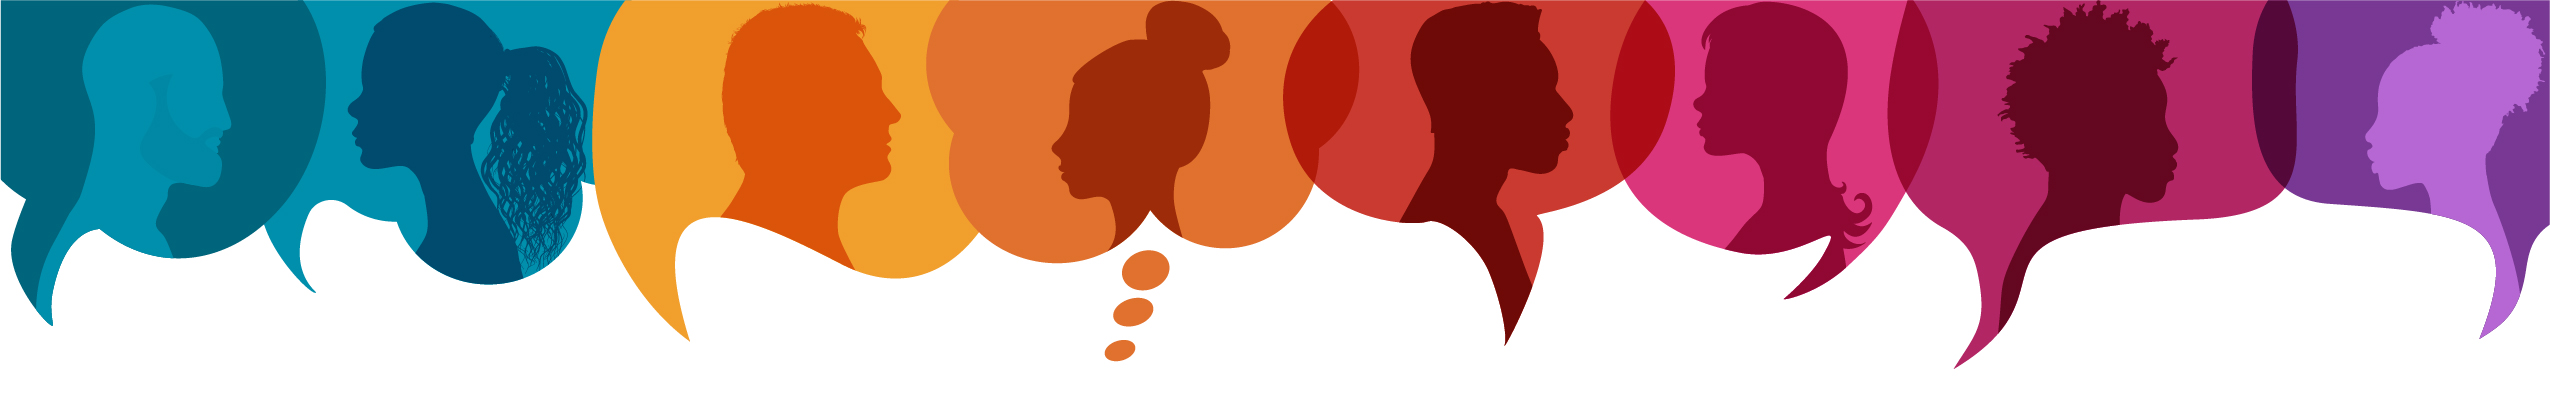 Colorful Illustration of diverse people inside speech bubbles